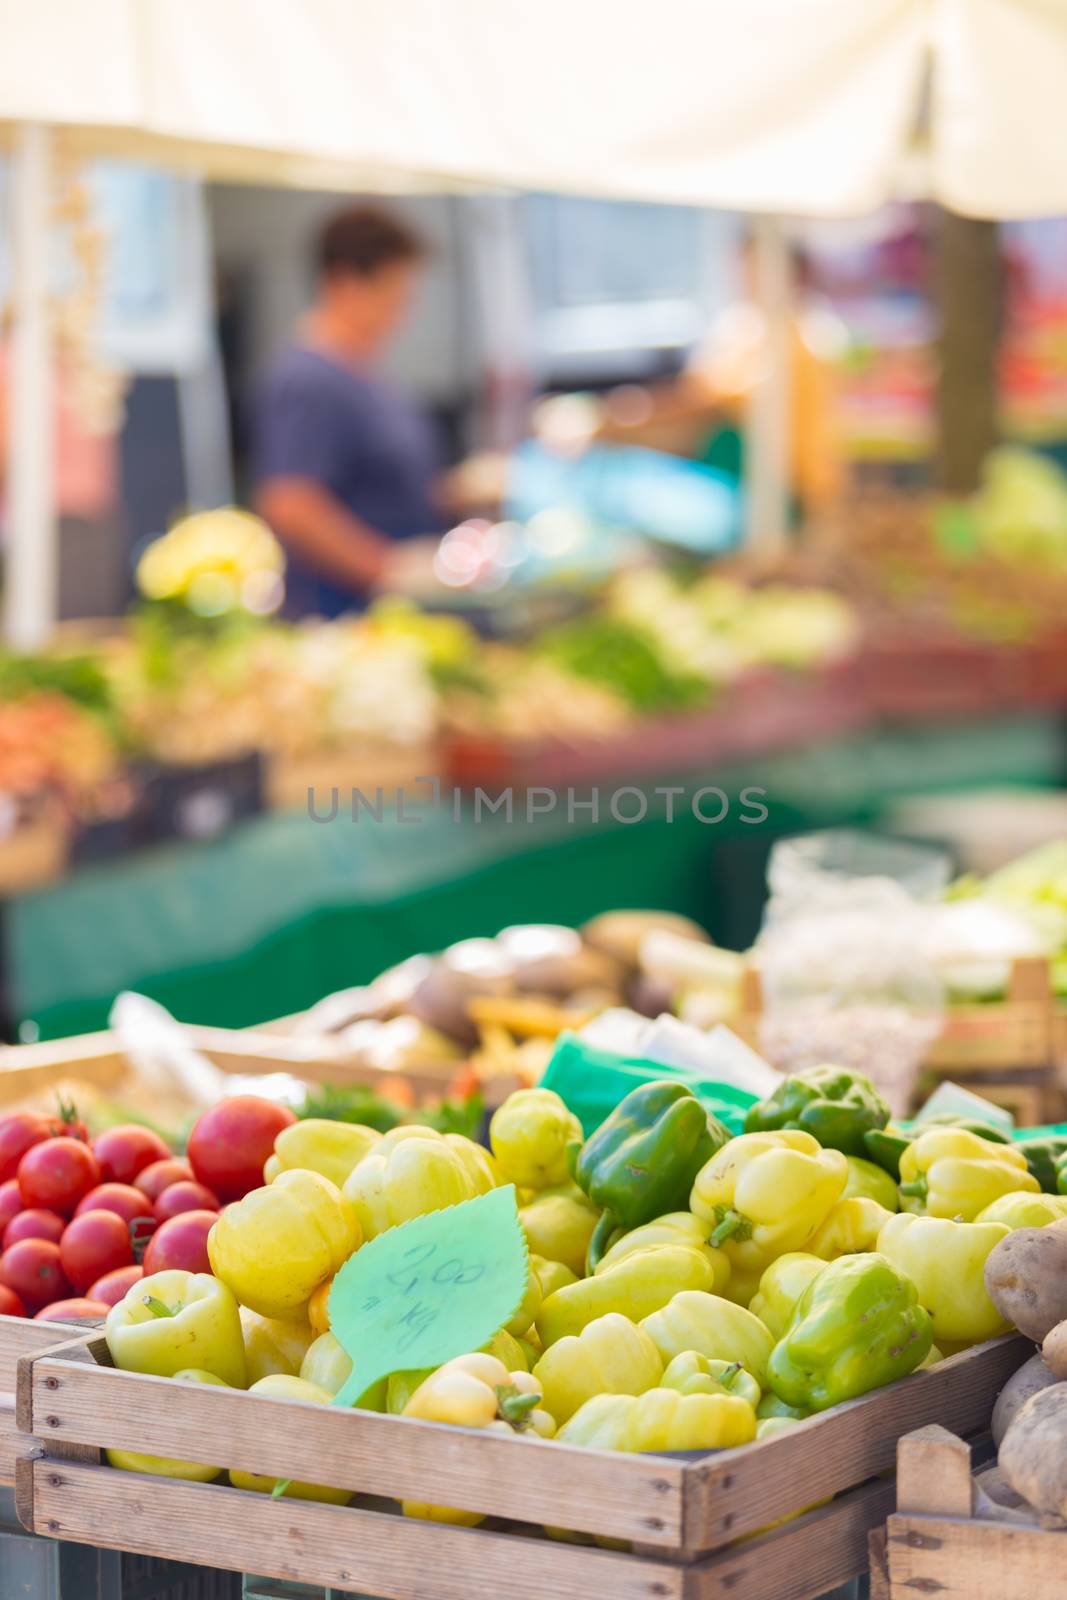 Farmers' market stall. by kasto